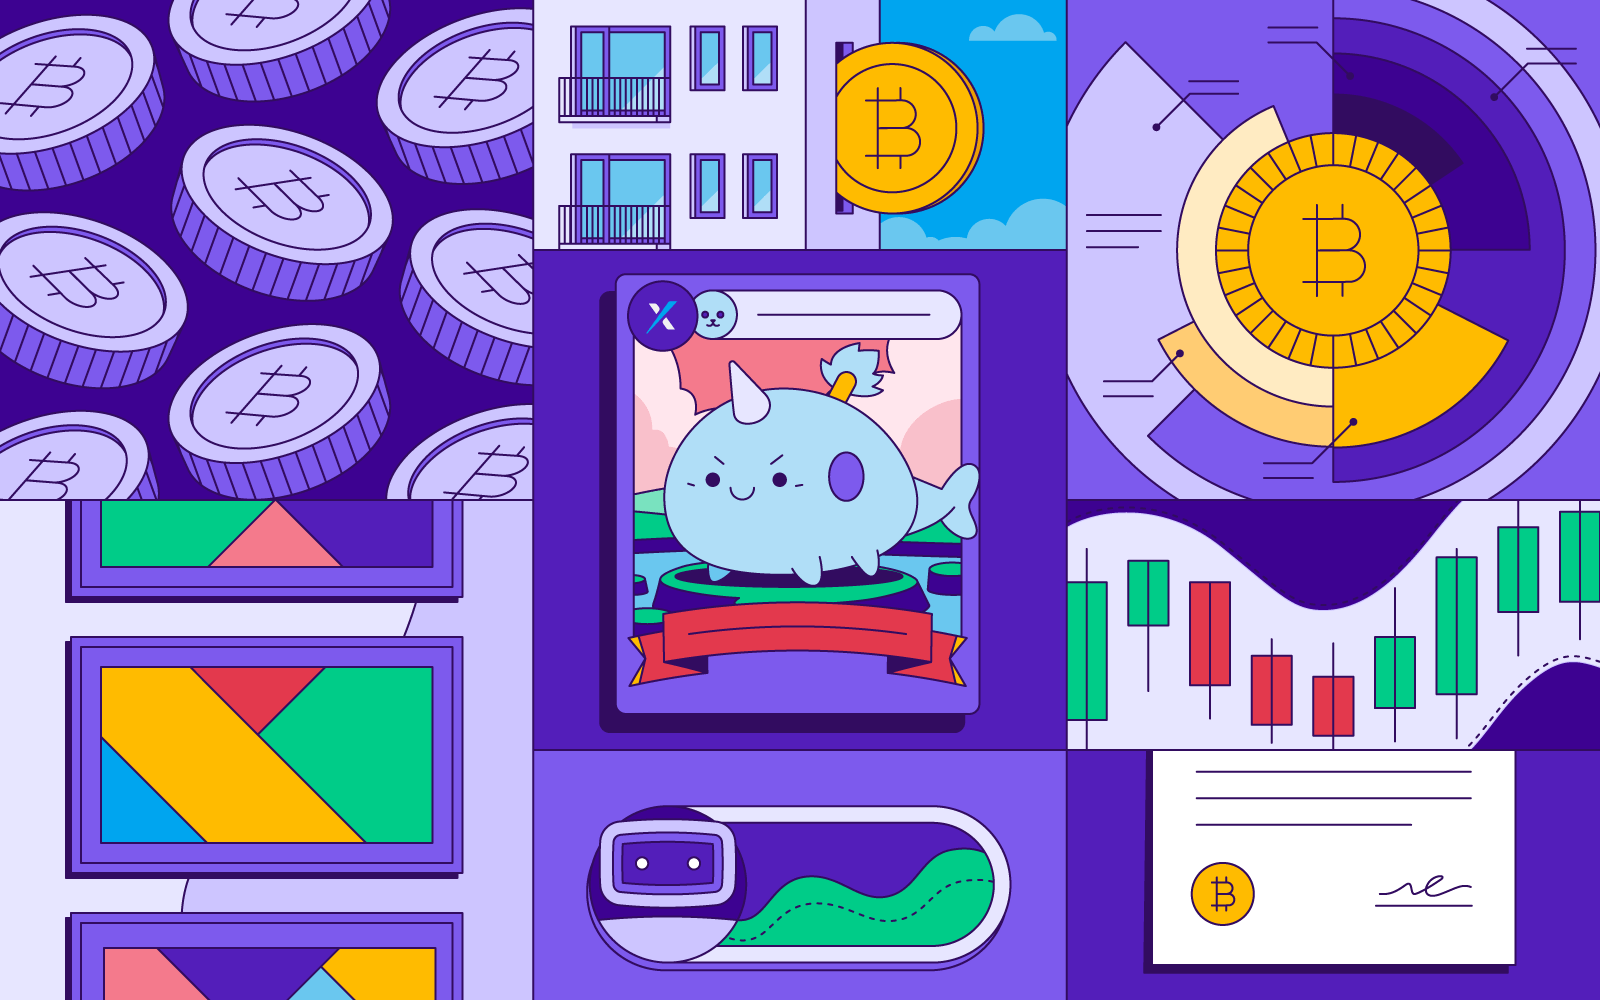 How to Make Money With Cryptocurrency as an Average Person